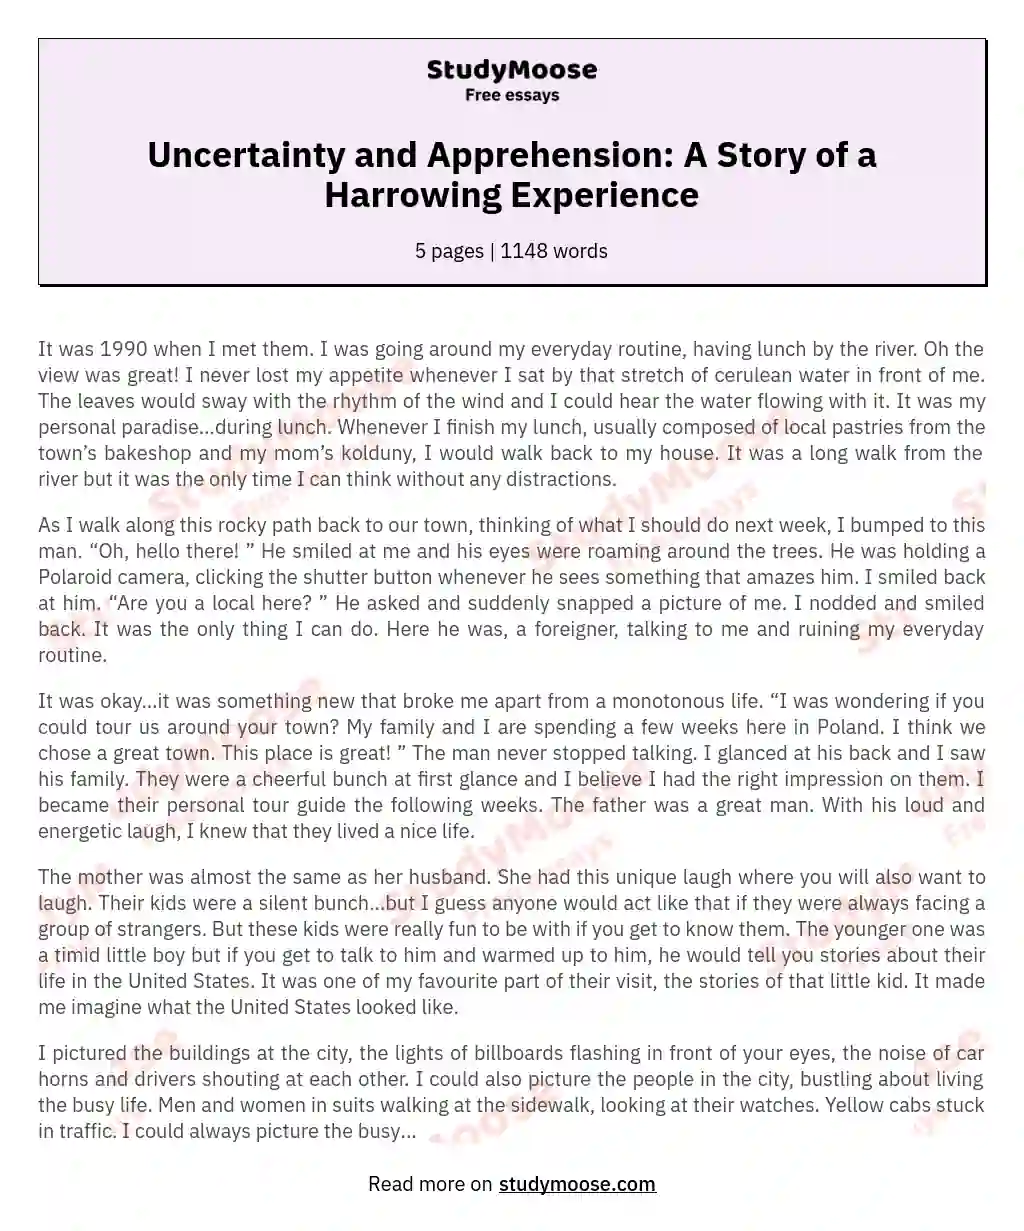 Uncertainty and Apprehension: A Story of a Harrowing Experience essay